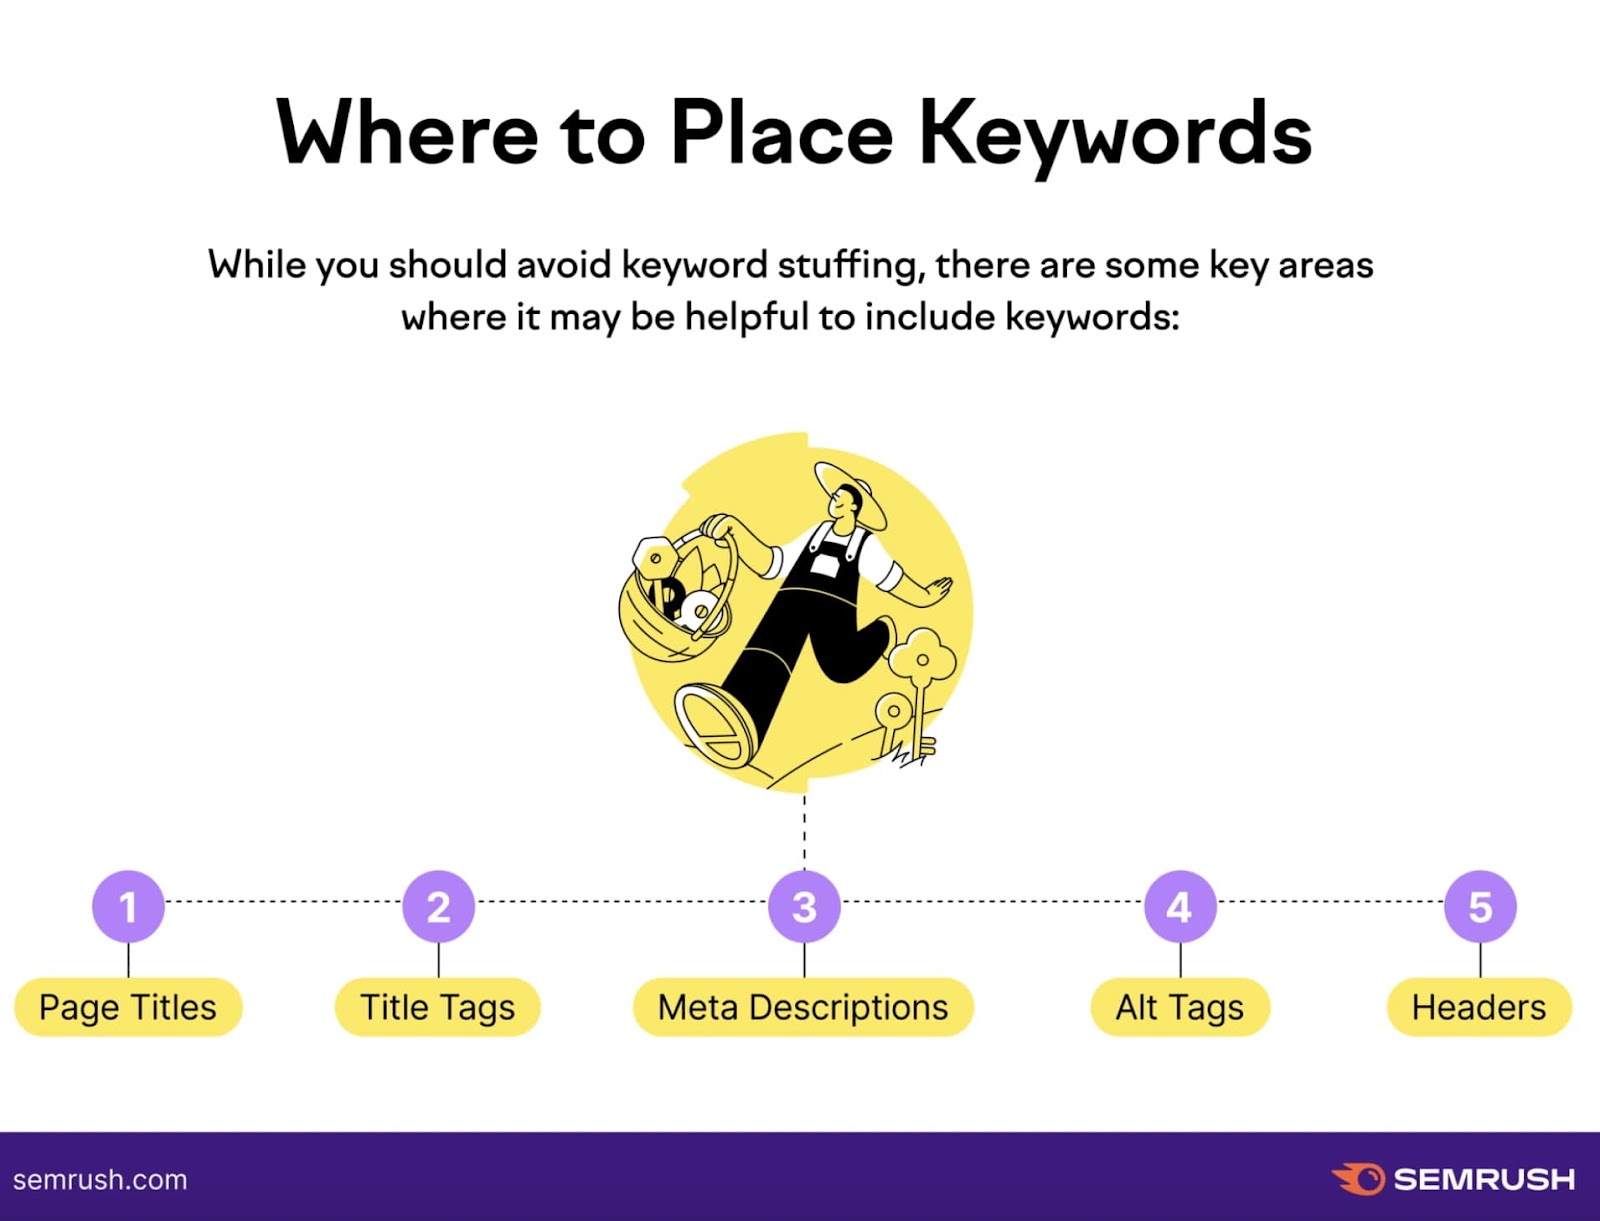 A visual by Semrush listing where to place keywords, including page titles, title tags, meta descriptions, alt tags and headers